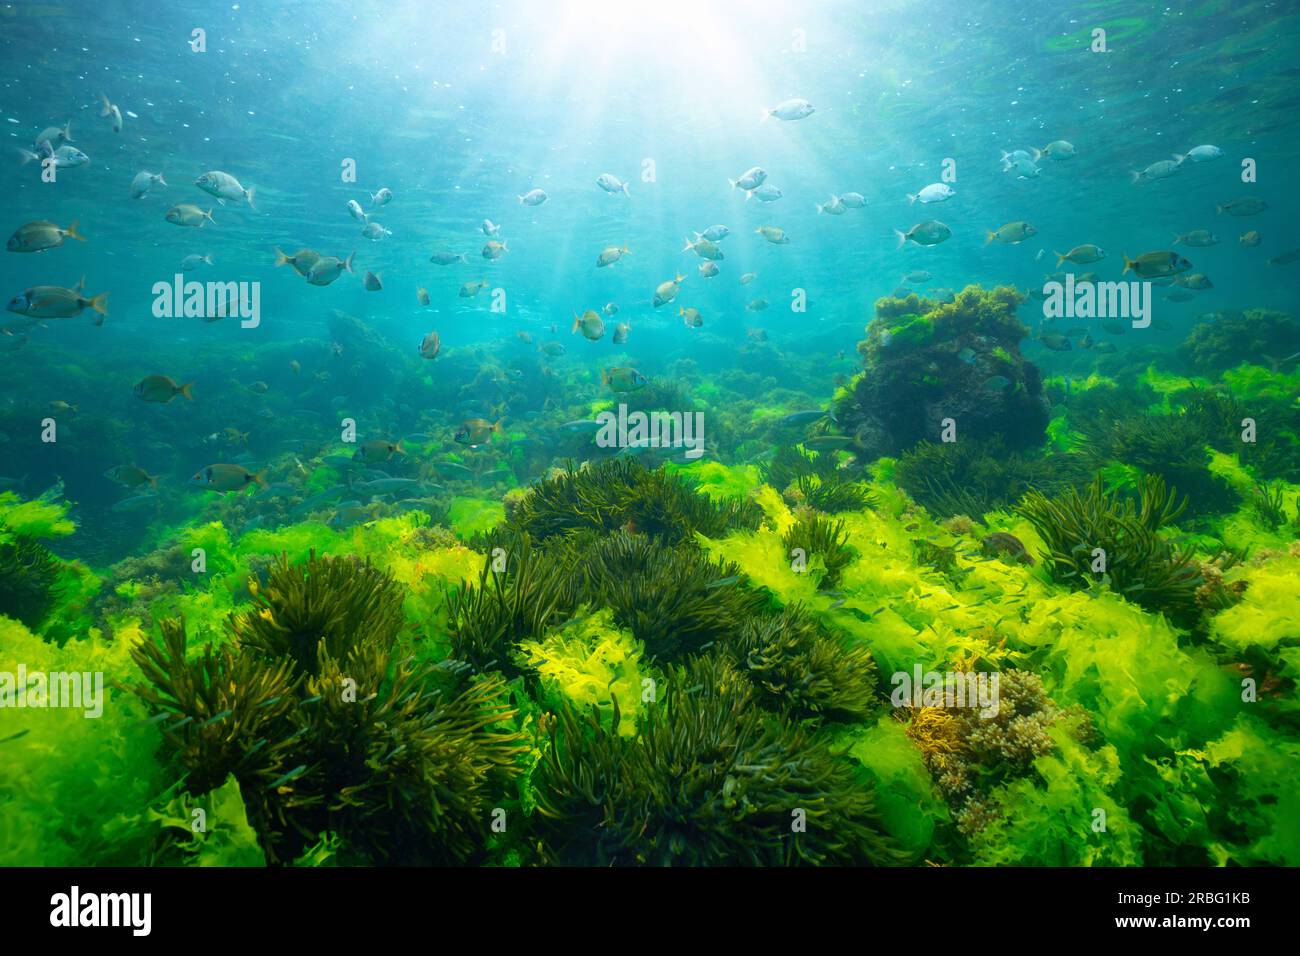 Green seaweed underwater with sunlight and shoal of fish, natural seascape in the Atlantic ocean, Spain, Galicia, Rias Baixas Stock Photo